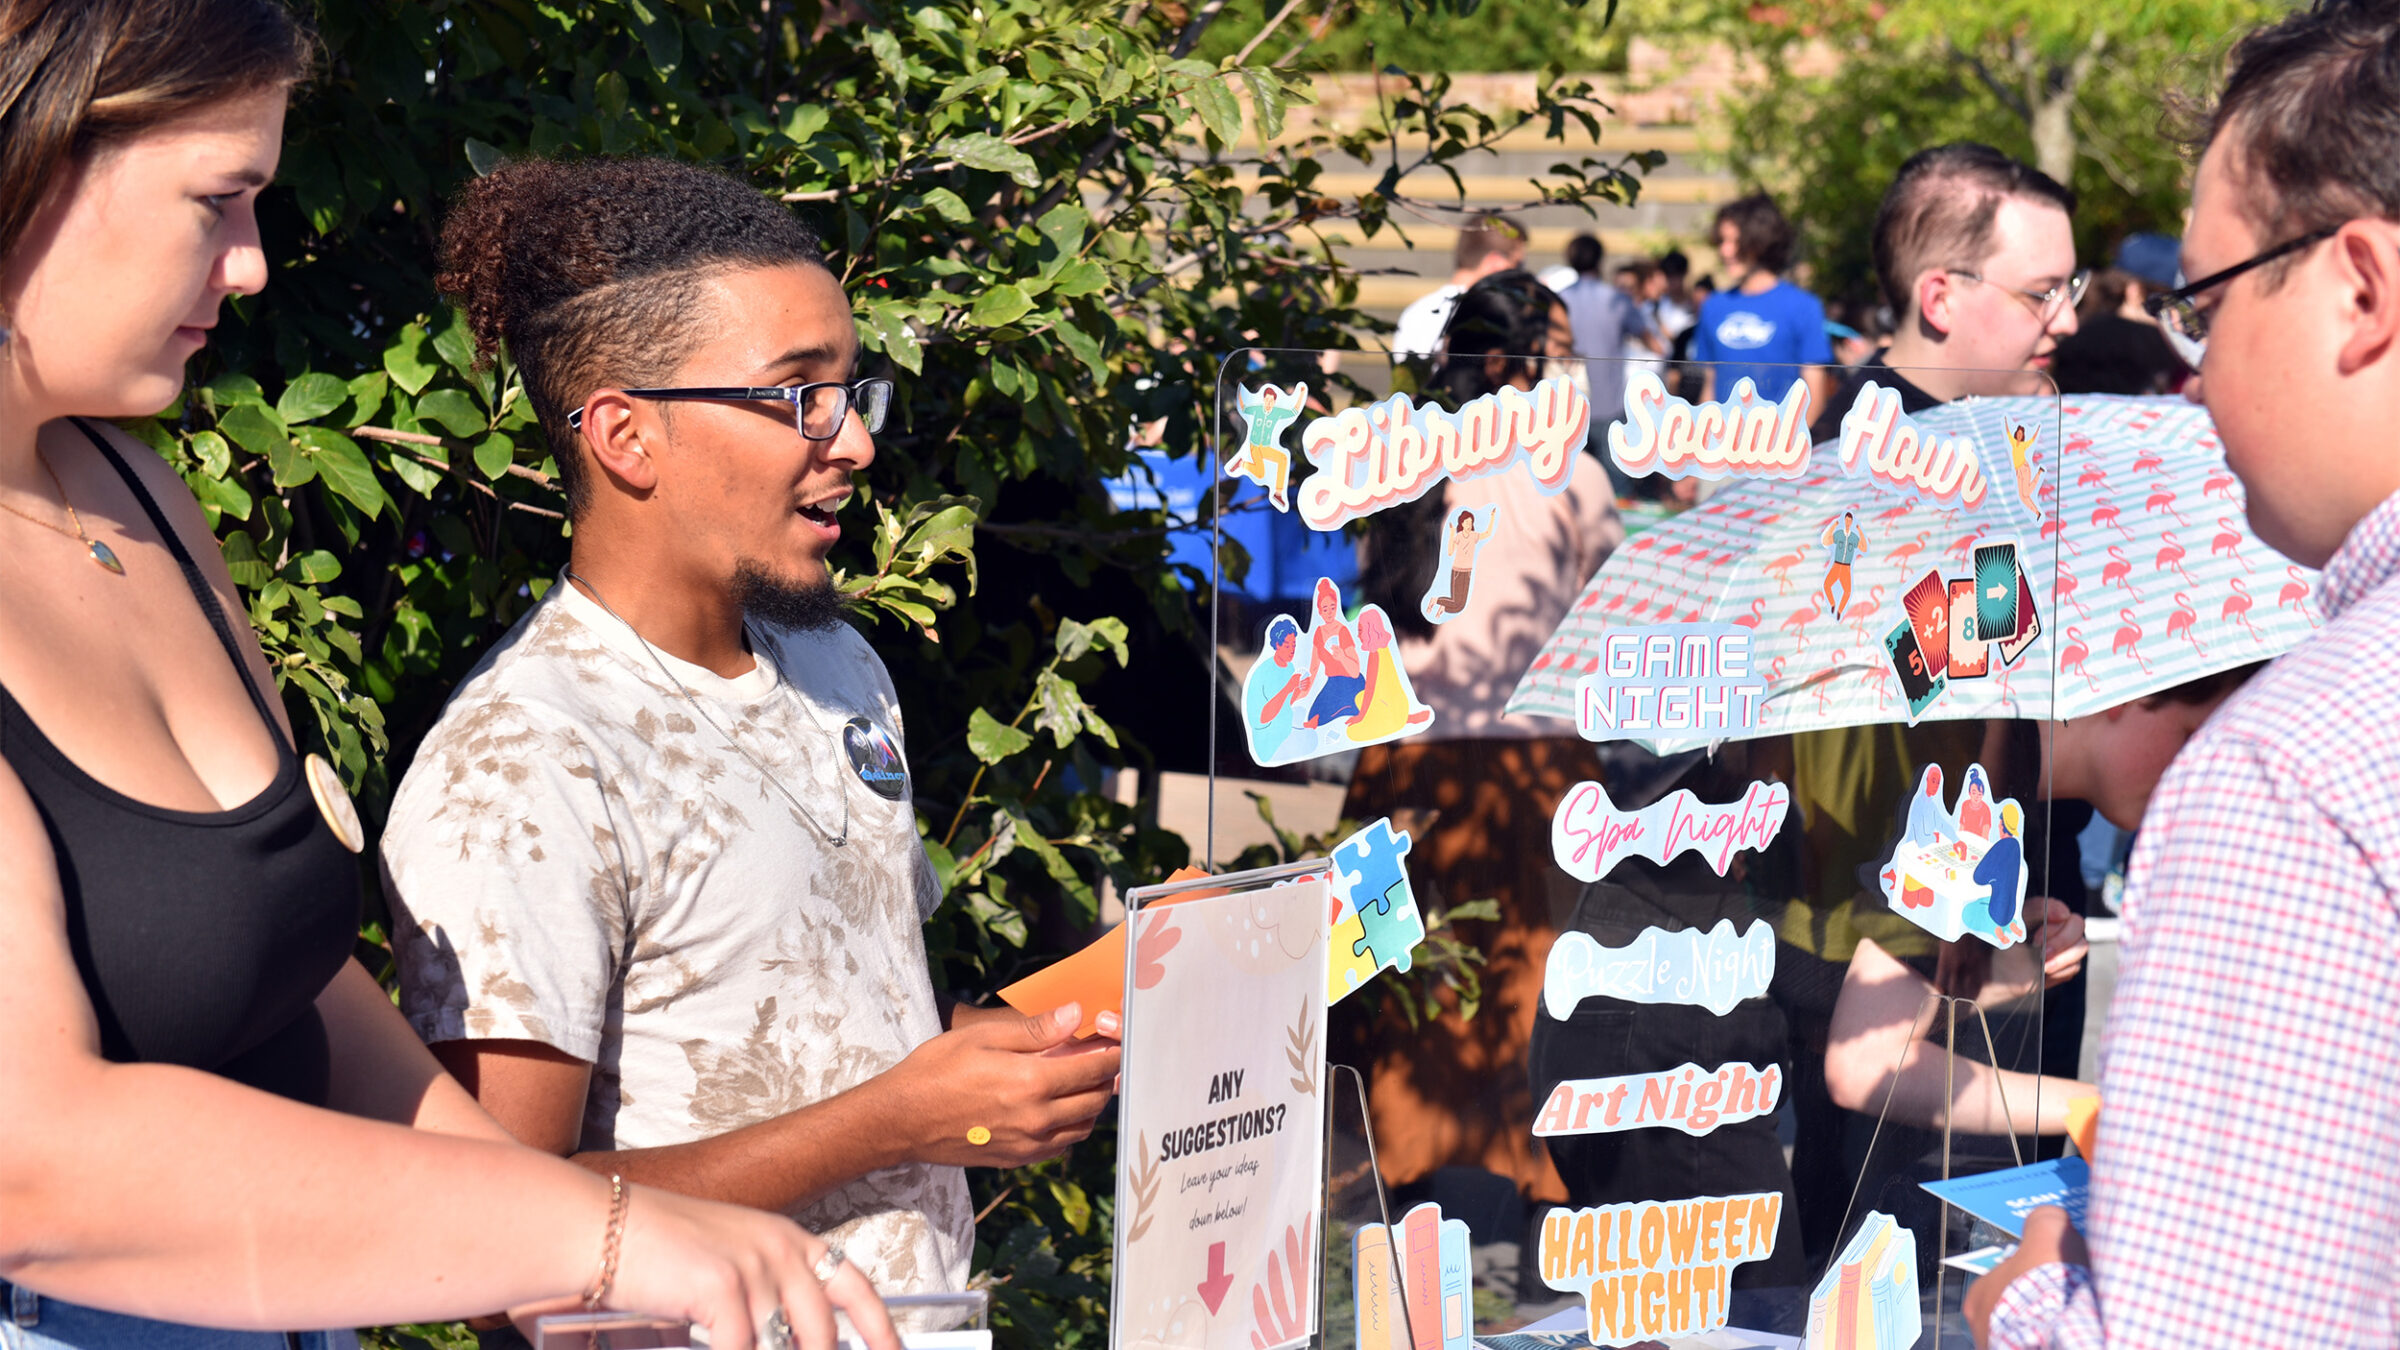 Two students speak with a third about library social hour at an outdoor activities fair